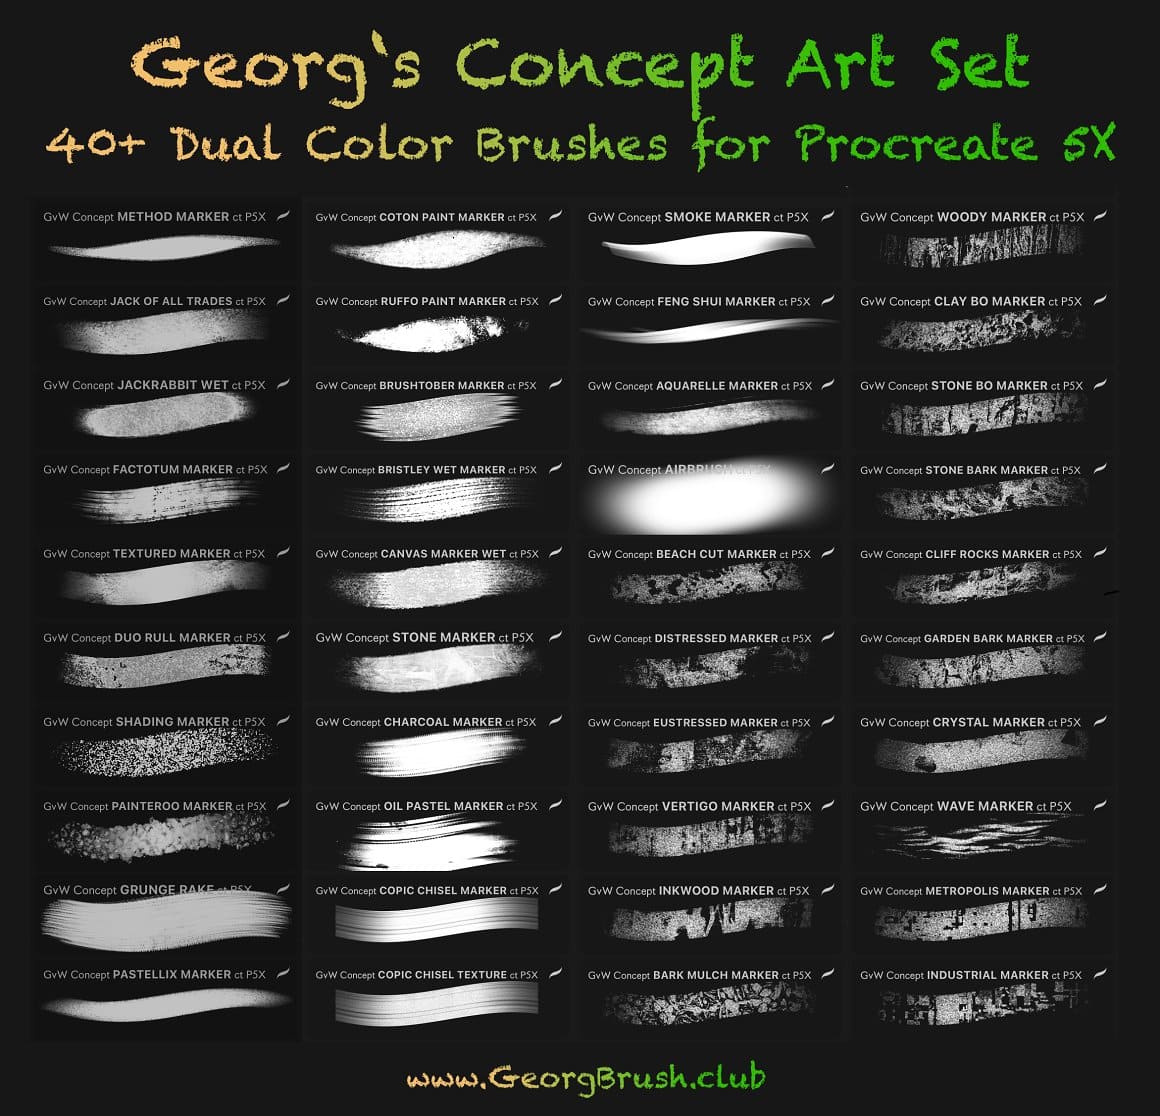 Georg's Concept Art Set, 40+ Dual Color Brushes for Procreate 5X.